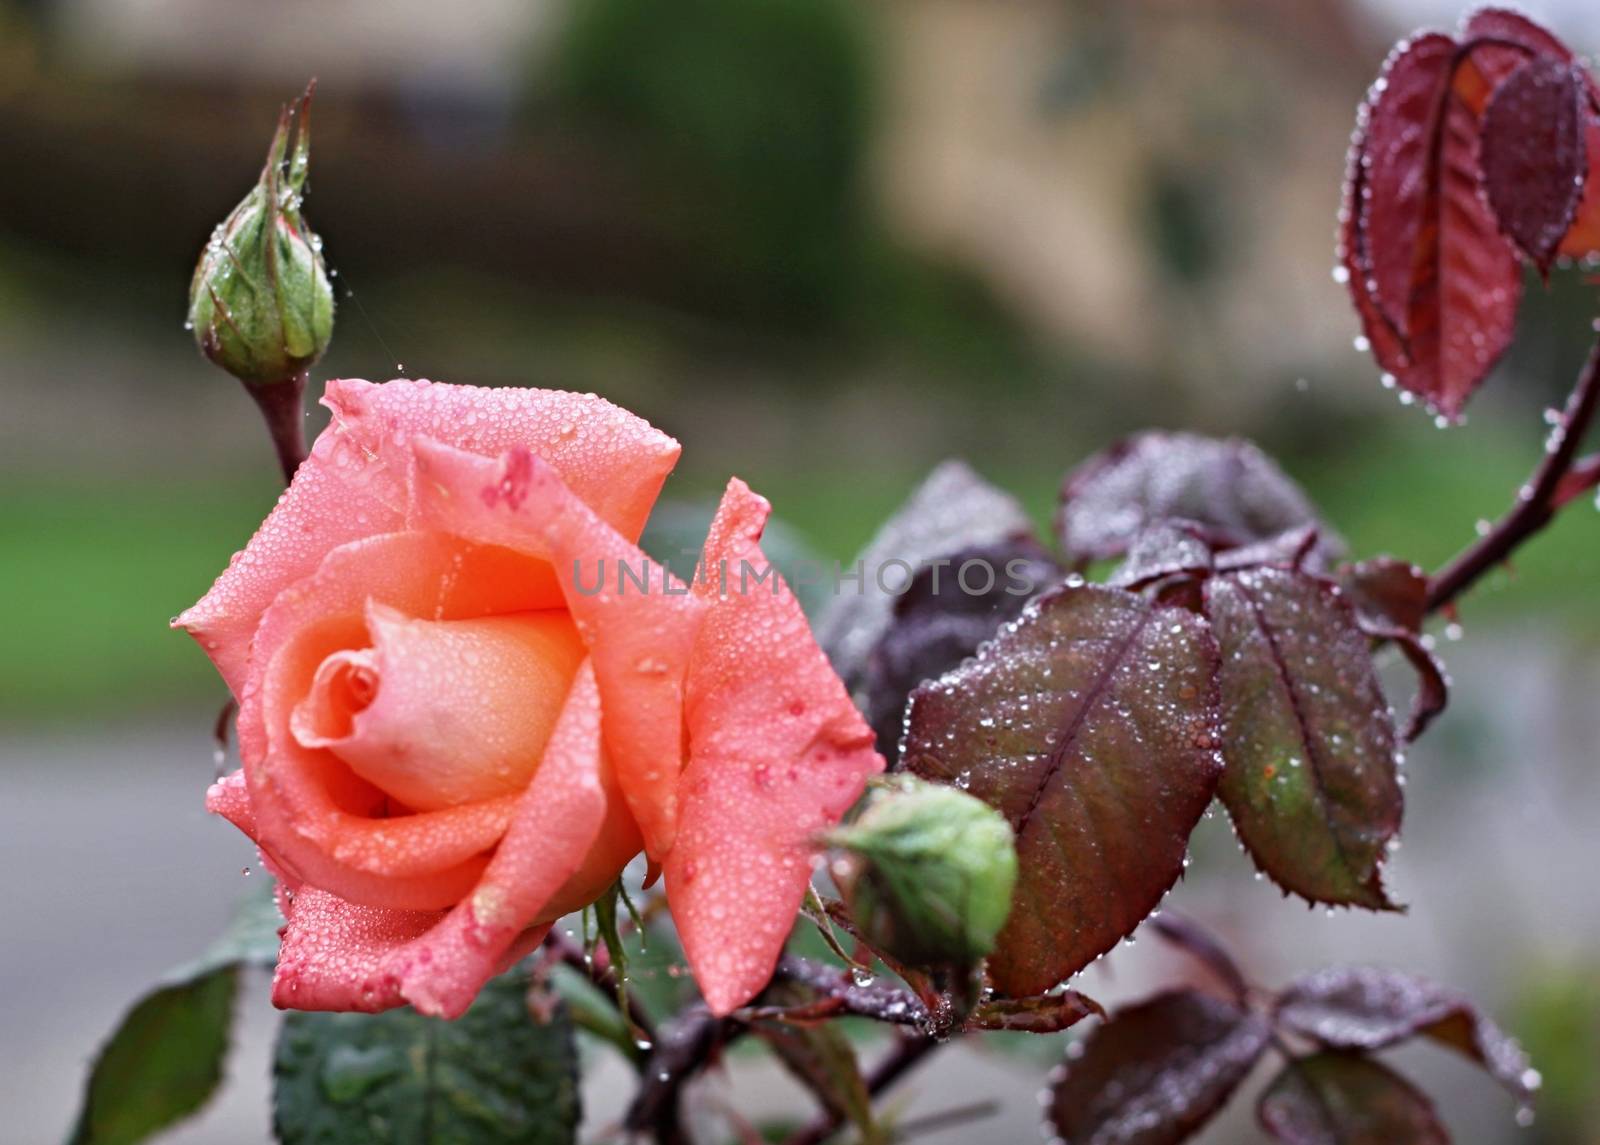 Beautiful rose with green leaf in the rain by jnerad